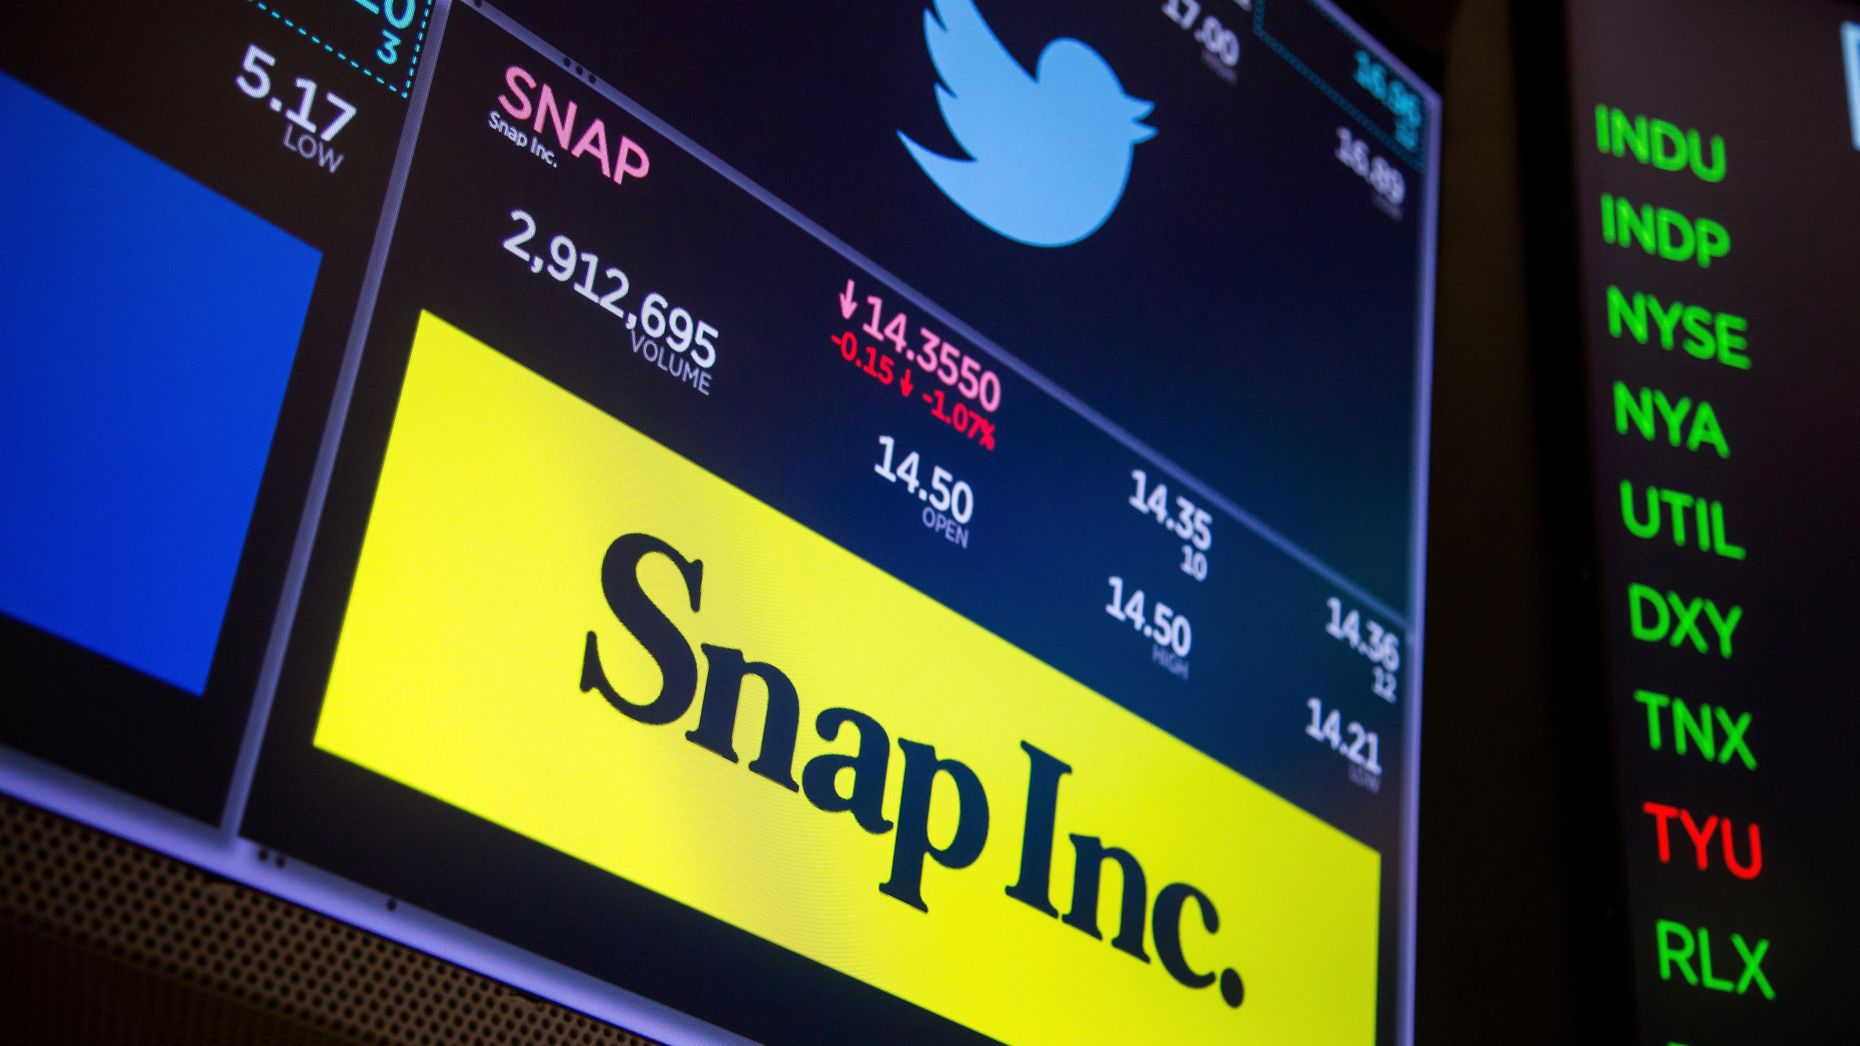 Techmeme: Sources: Snap's head of engineering Tim Sehn to ...